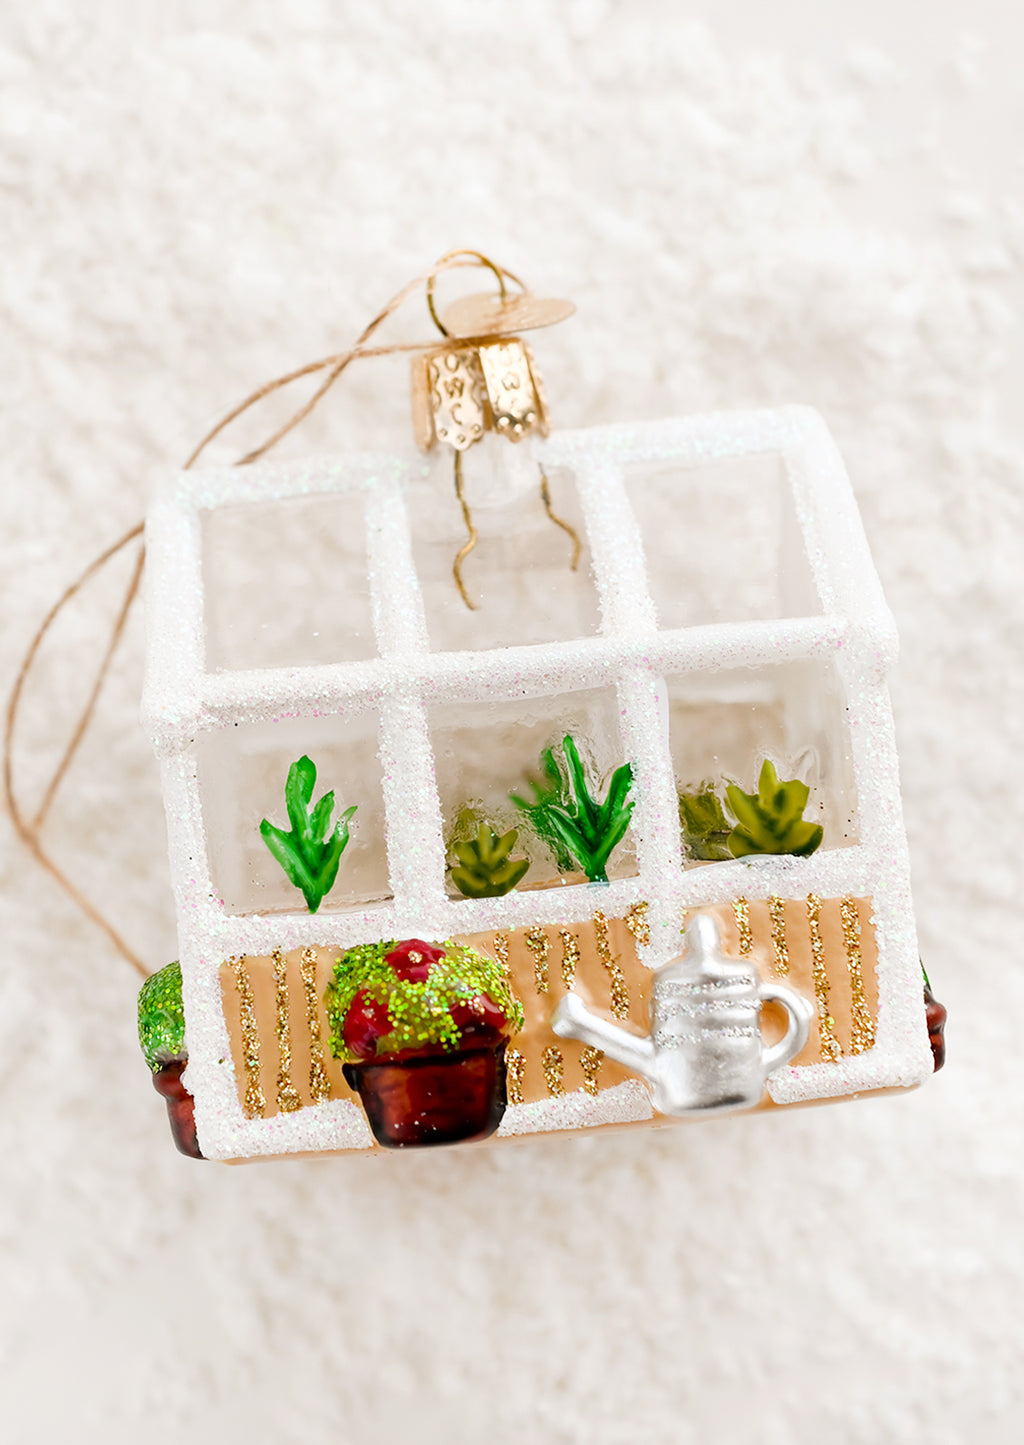 1: A decorative glass holiday ornament of a glass greenhouse.